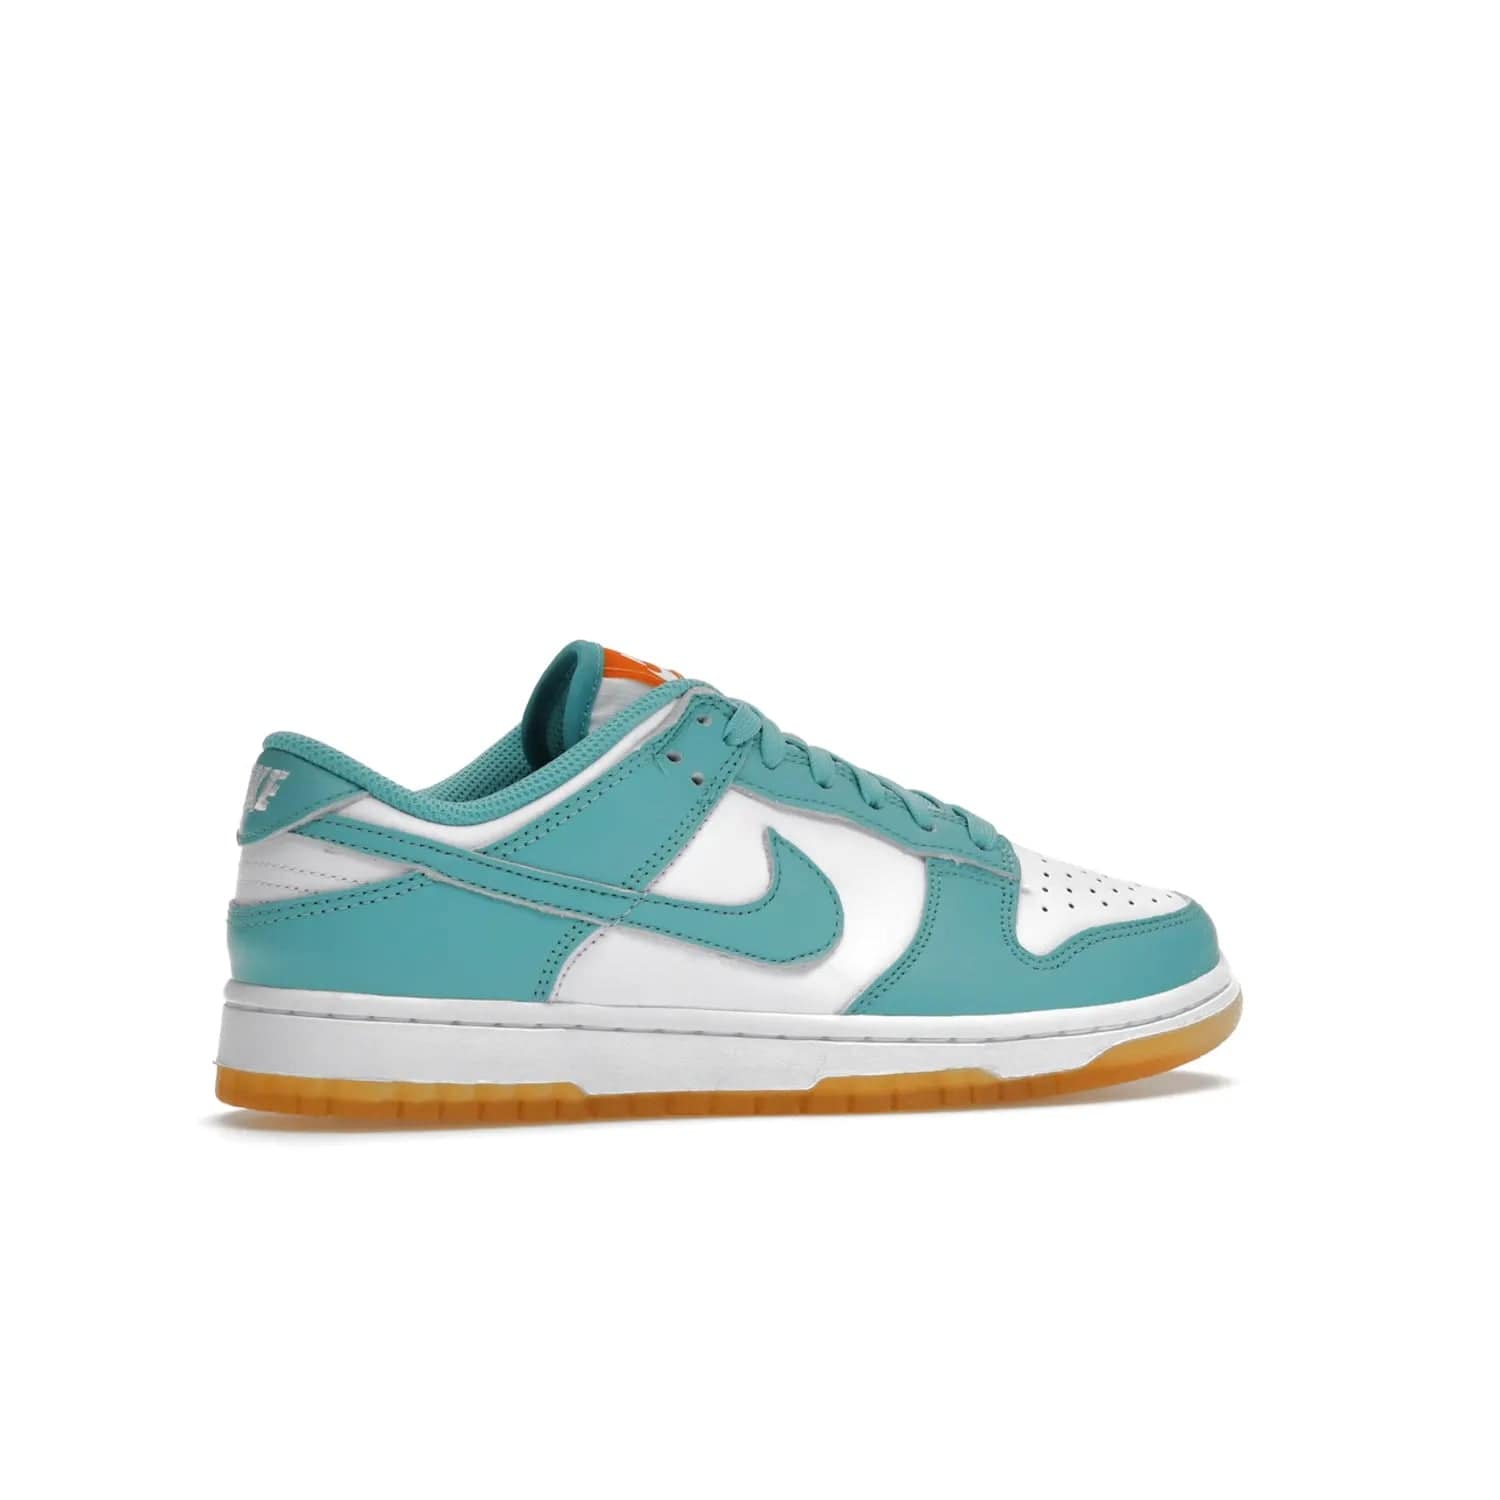 Nike Dunk Low Teal Zeal (Women's) - Image 35 - Only at www.BallersClubKickz.com - A white leather upper with teal overlays and Swooshes, plus yellow and embroidered accents make the Nike Dunk Low Teal Zeal (Women's) the perfect statement piece for any wardrobe.